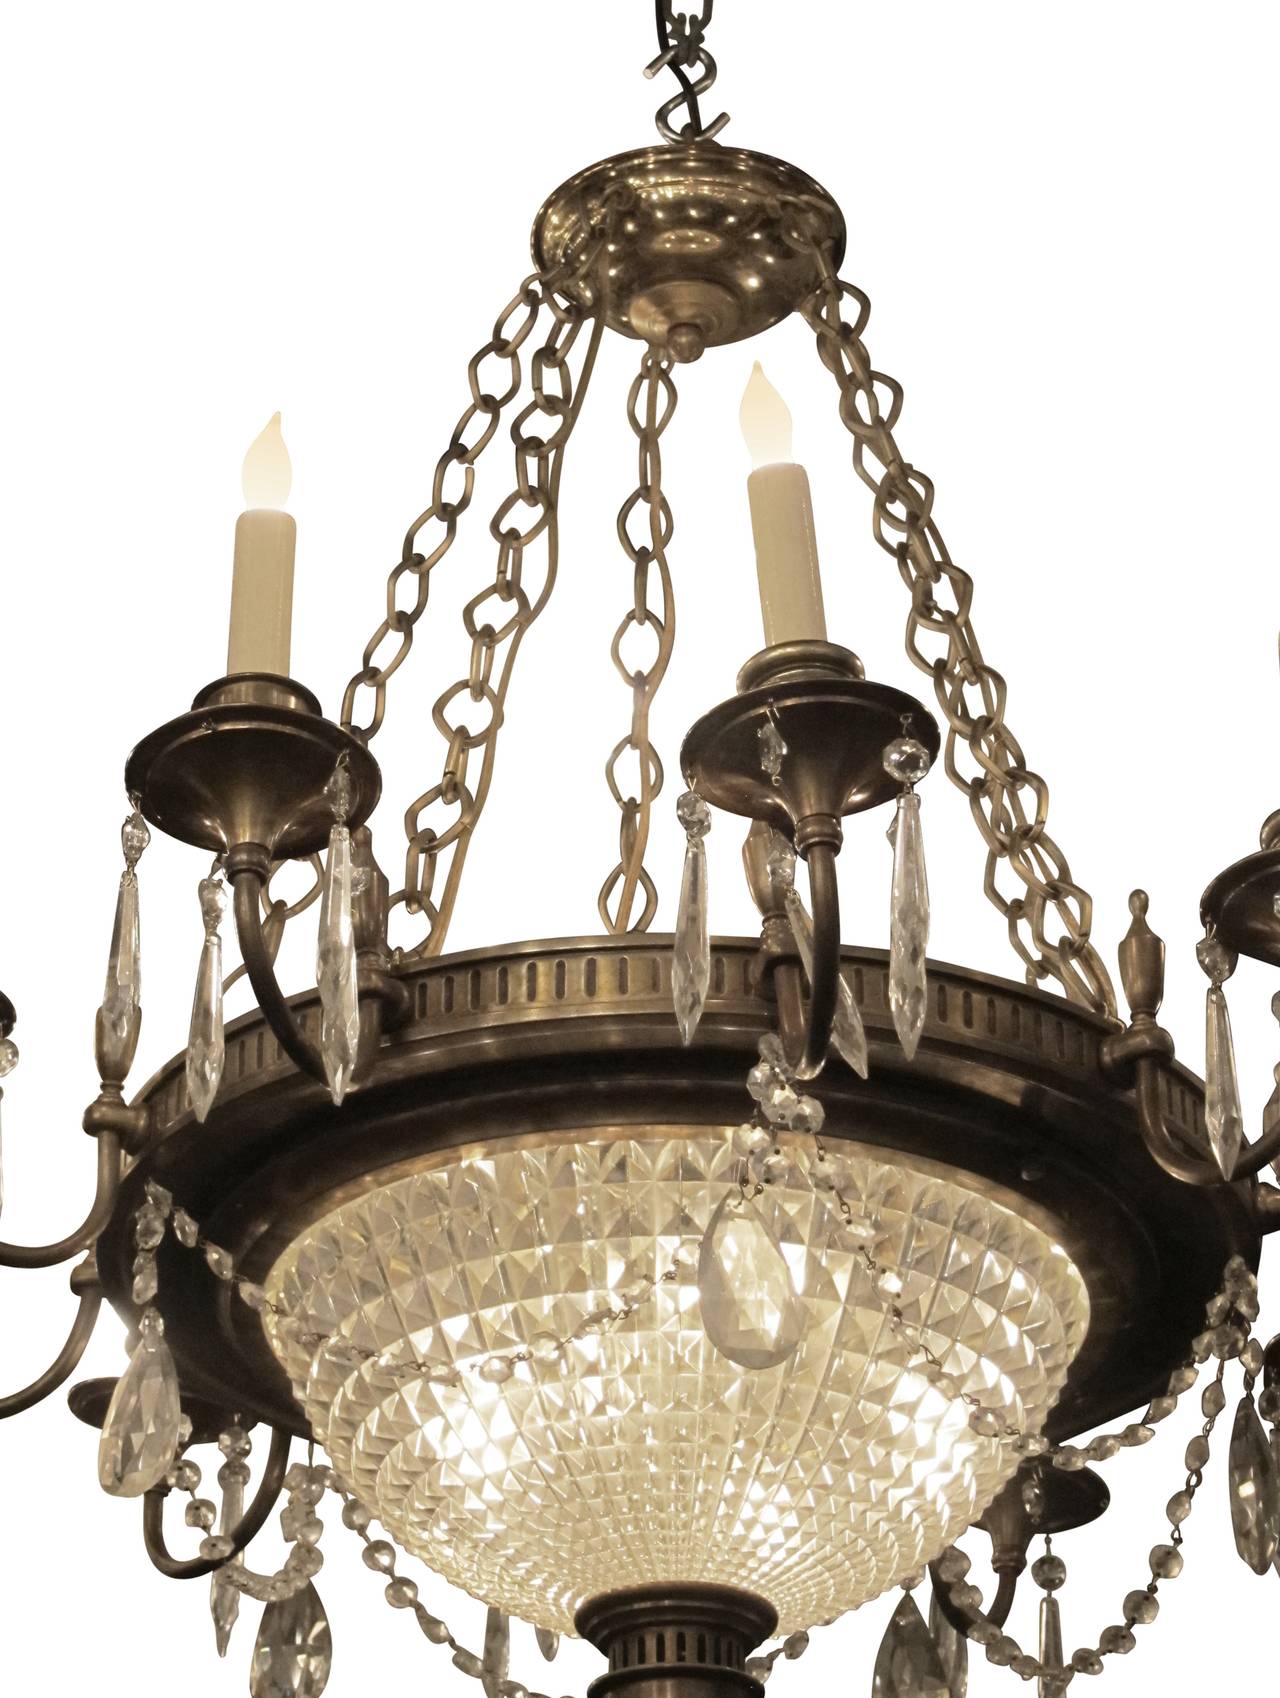 Bronze and crystal twelve-arm Empire style French chandelier with crystal swags from 1920s. This can be seen at our 2420 Broadway location on the upper west side in Manhattan.